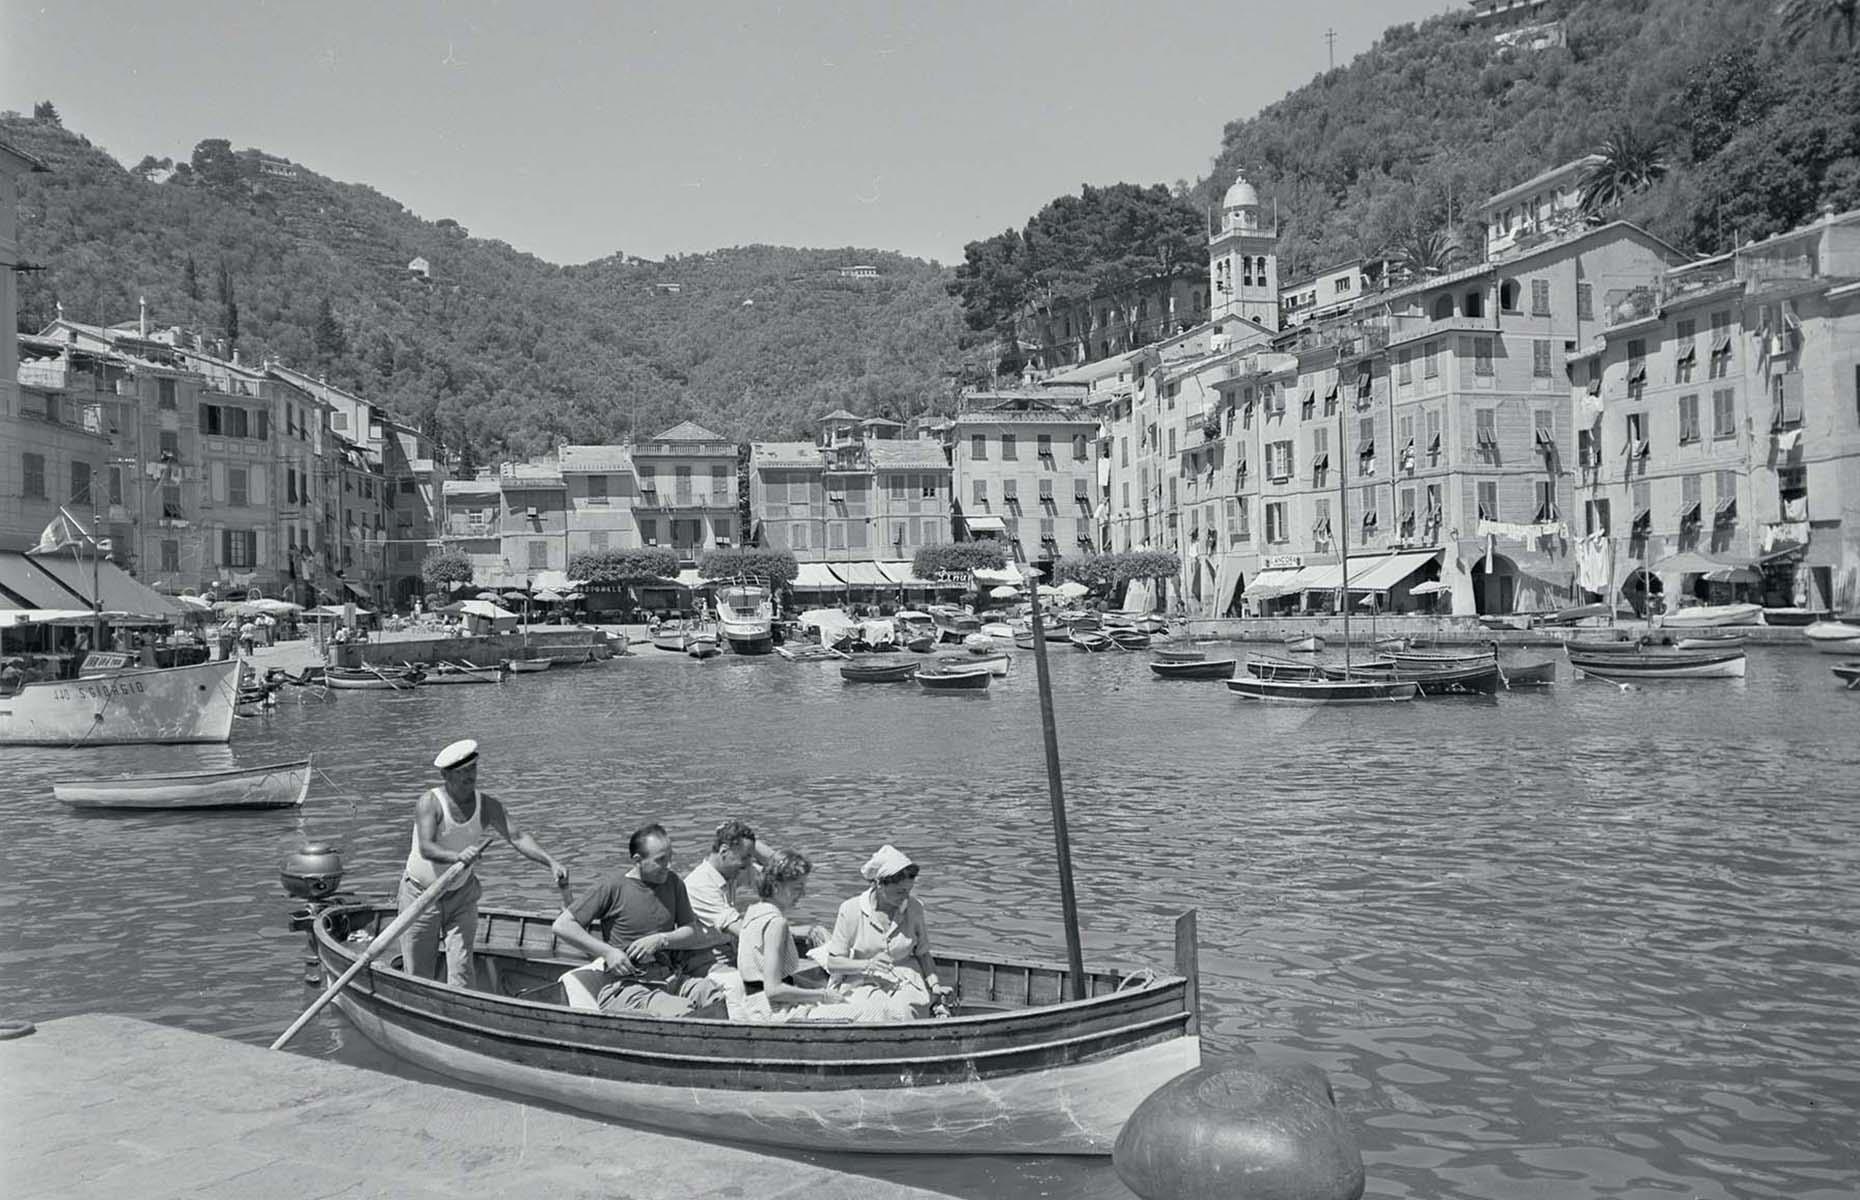 Portofino was (and arguably still is) the most famous of all the resorts on the Italian coast. By the 1950s, glamorous movie stars from across the pond – most notably Rita Hayworth, Clark Gable, Ava Gardner and Humphrey Bogart – all set their sights on Portofino for their vacations. This nostalgic shot from the 1950s perfectly captures the atmospheric town and its picturesque harbor.